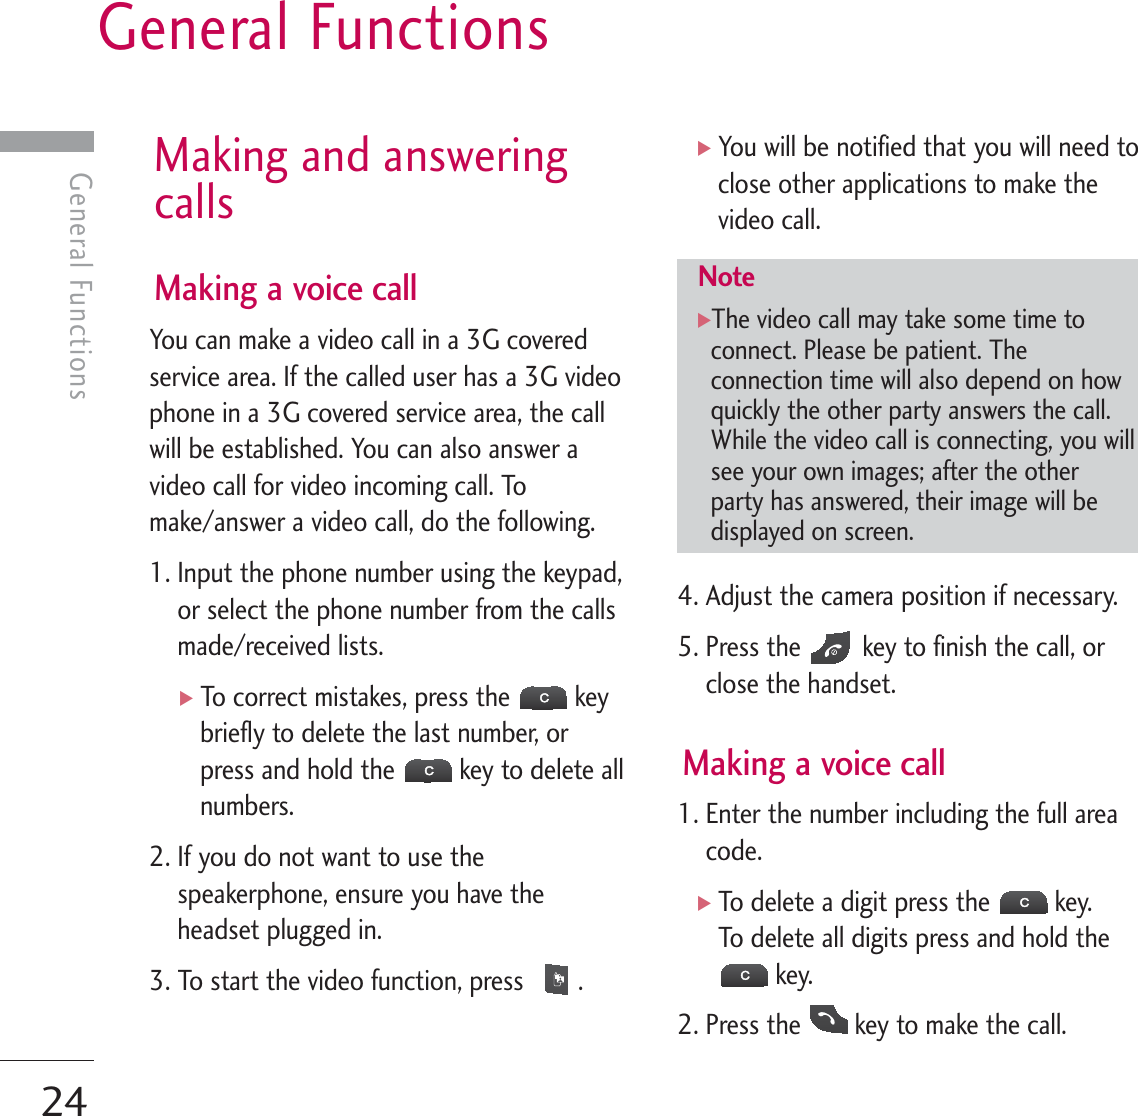 General Functions24General FunctionsMaking and answeringcallsMaking a voice callYou can make a video call in a 3G coveredservice area. If the called user has a 3G videophone in a 3G covered service area, the callwill be established. You can also answer avideo call for video incoming call. Tomake/answer a video call, do the following.1. Input the phone number using the keypad,or select the phone number from the callsmade/received lists.]To correct mistakes, press the  keybriefly to delete the last number, orpress and hold the  key to delete allnumbers.2. If you do not want to use thespeakerphone, ensure you have theheadset plugged in.3. To start the video function, press  .]You will be notified that you will need toclose other applications to make thevideo call.4. Adjust the camera position if necessary.5. Press the  key to finish the call, orclose the handset.Making a voice call1. Enter the number including the full areacode.]To delete a digit press the  key.To delete all digits press and hold thekey.2. Press the  key to make the call.Note]The video call may take some time toconnect. Please be patient. Theconnection time will also depend on howquickly the other party answers the call.While the video call is connecting, you willsee your own images; after the otherparty has answered, their image will bedisplayed on screen.